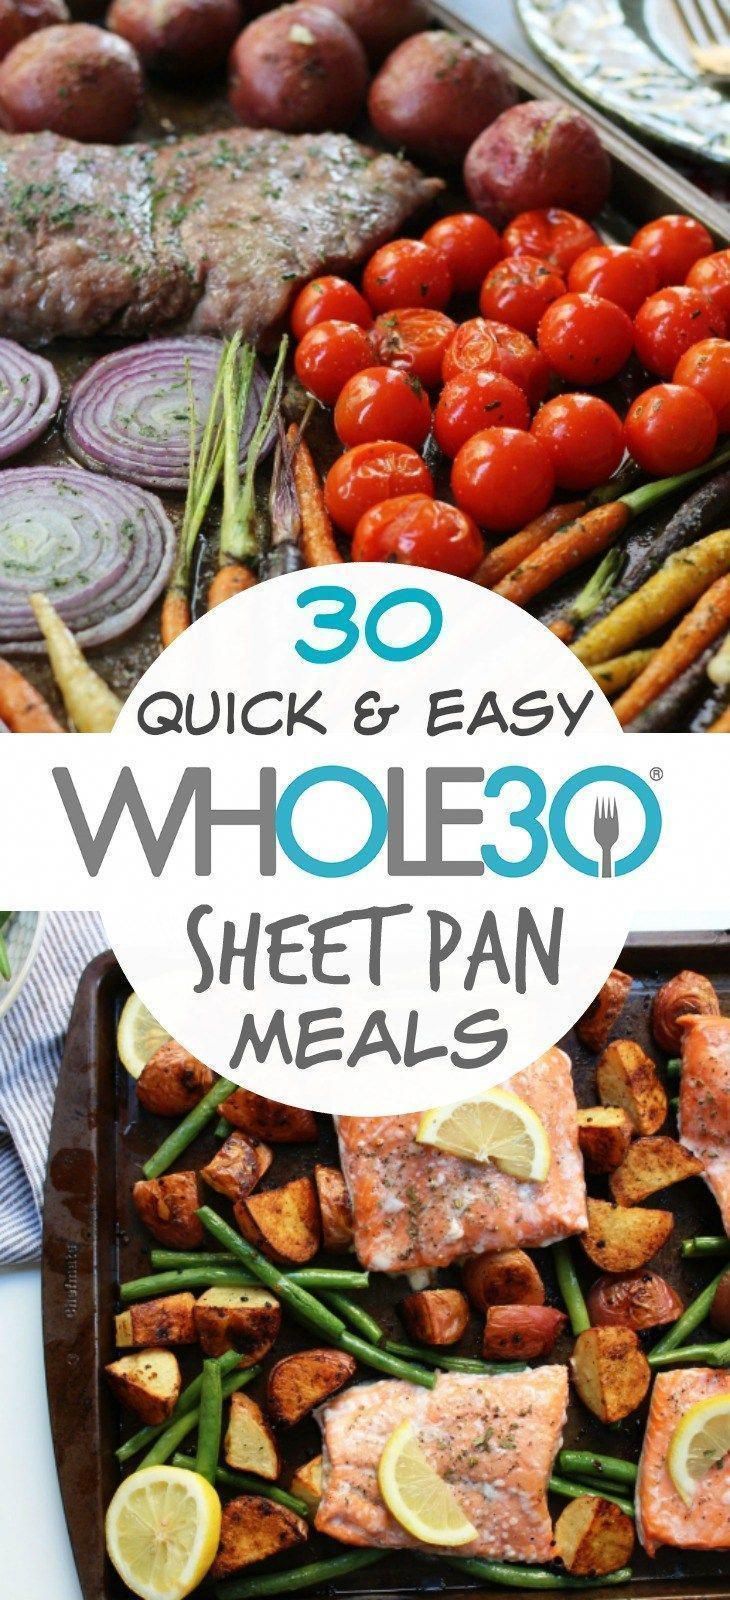 30 Whole30 Sheet Pan Recipes: The Best Quick and Easy One Pan Meals - Whole Kitchen Sink -   19 healthy recipes Meal Prep families ideas